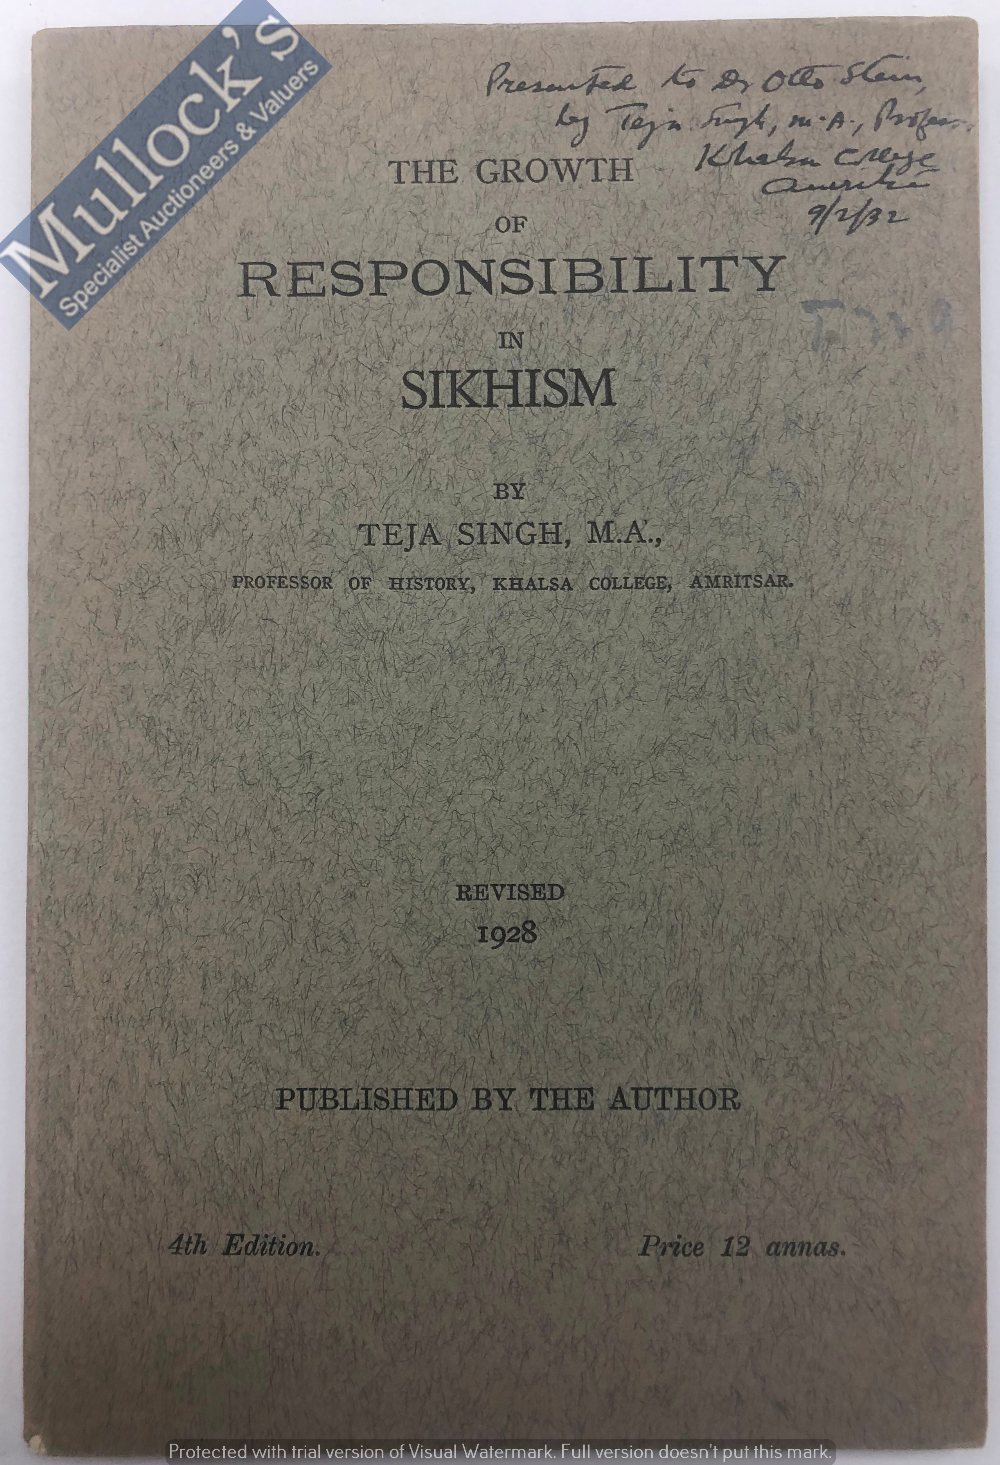 India & Punjab – Responsibility of Sikhism by Teja Singh Publication - A rare pamphlet titled The